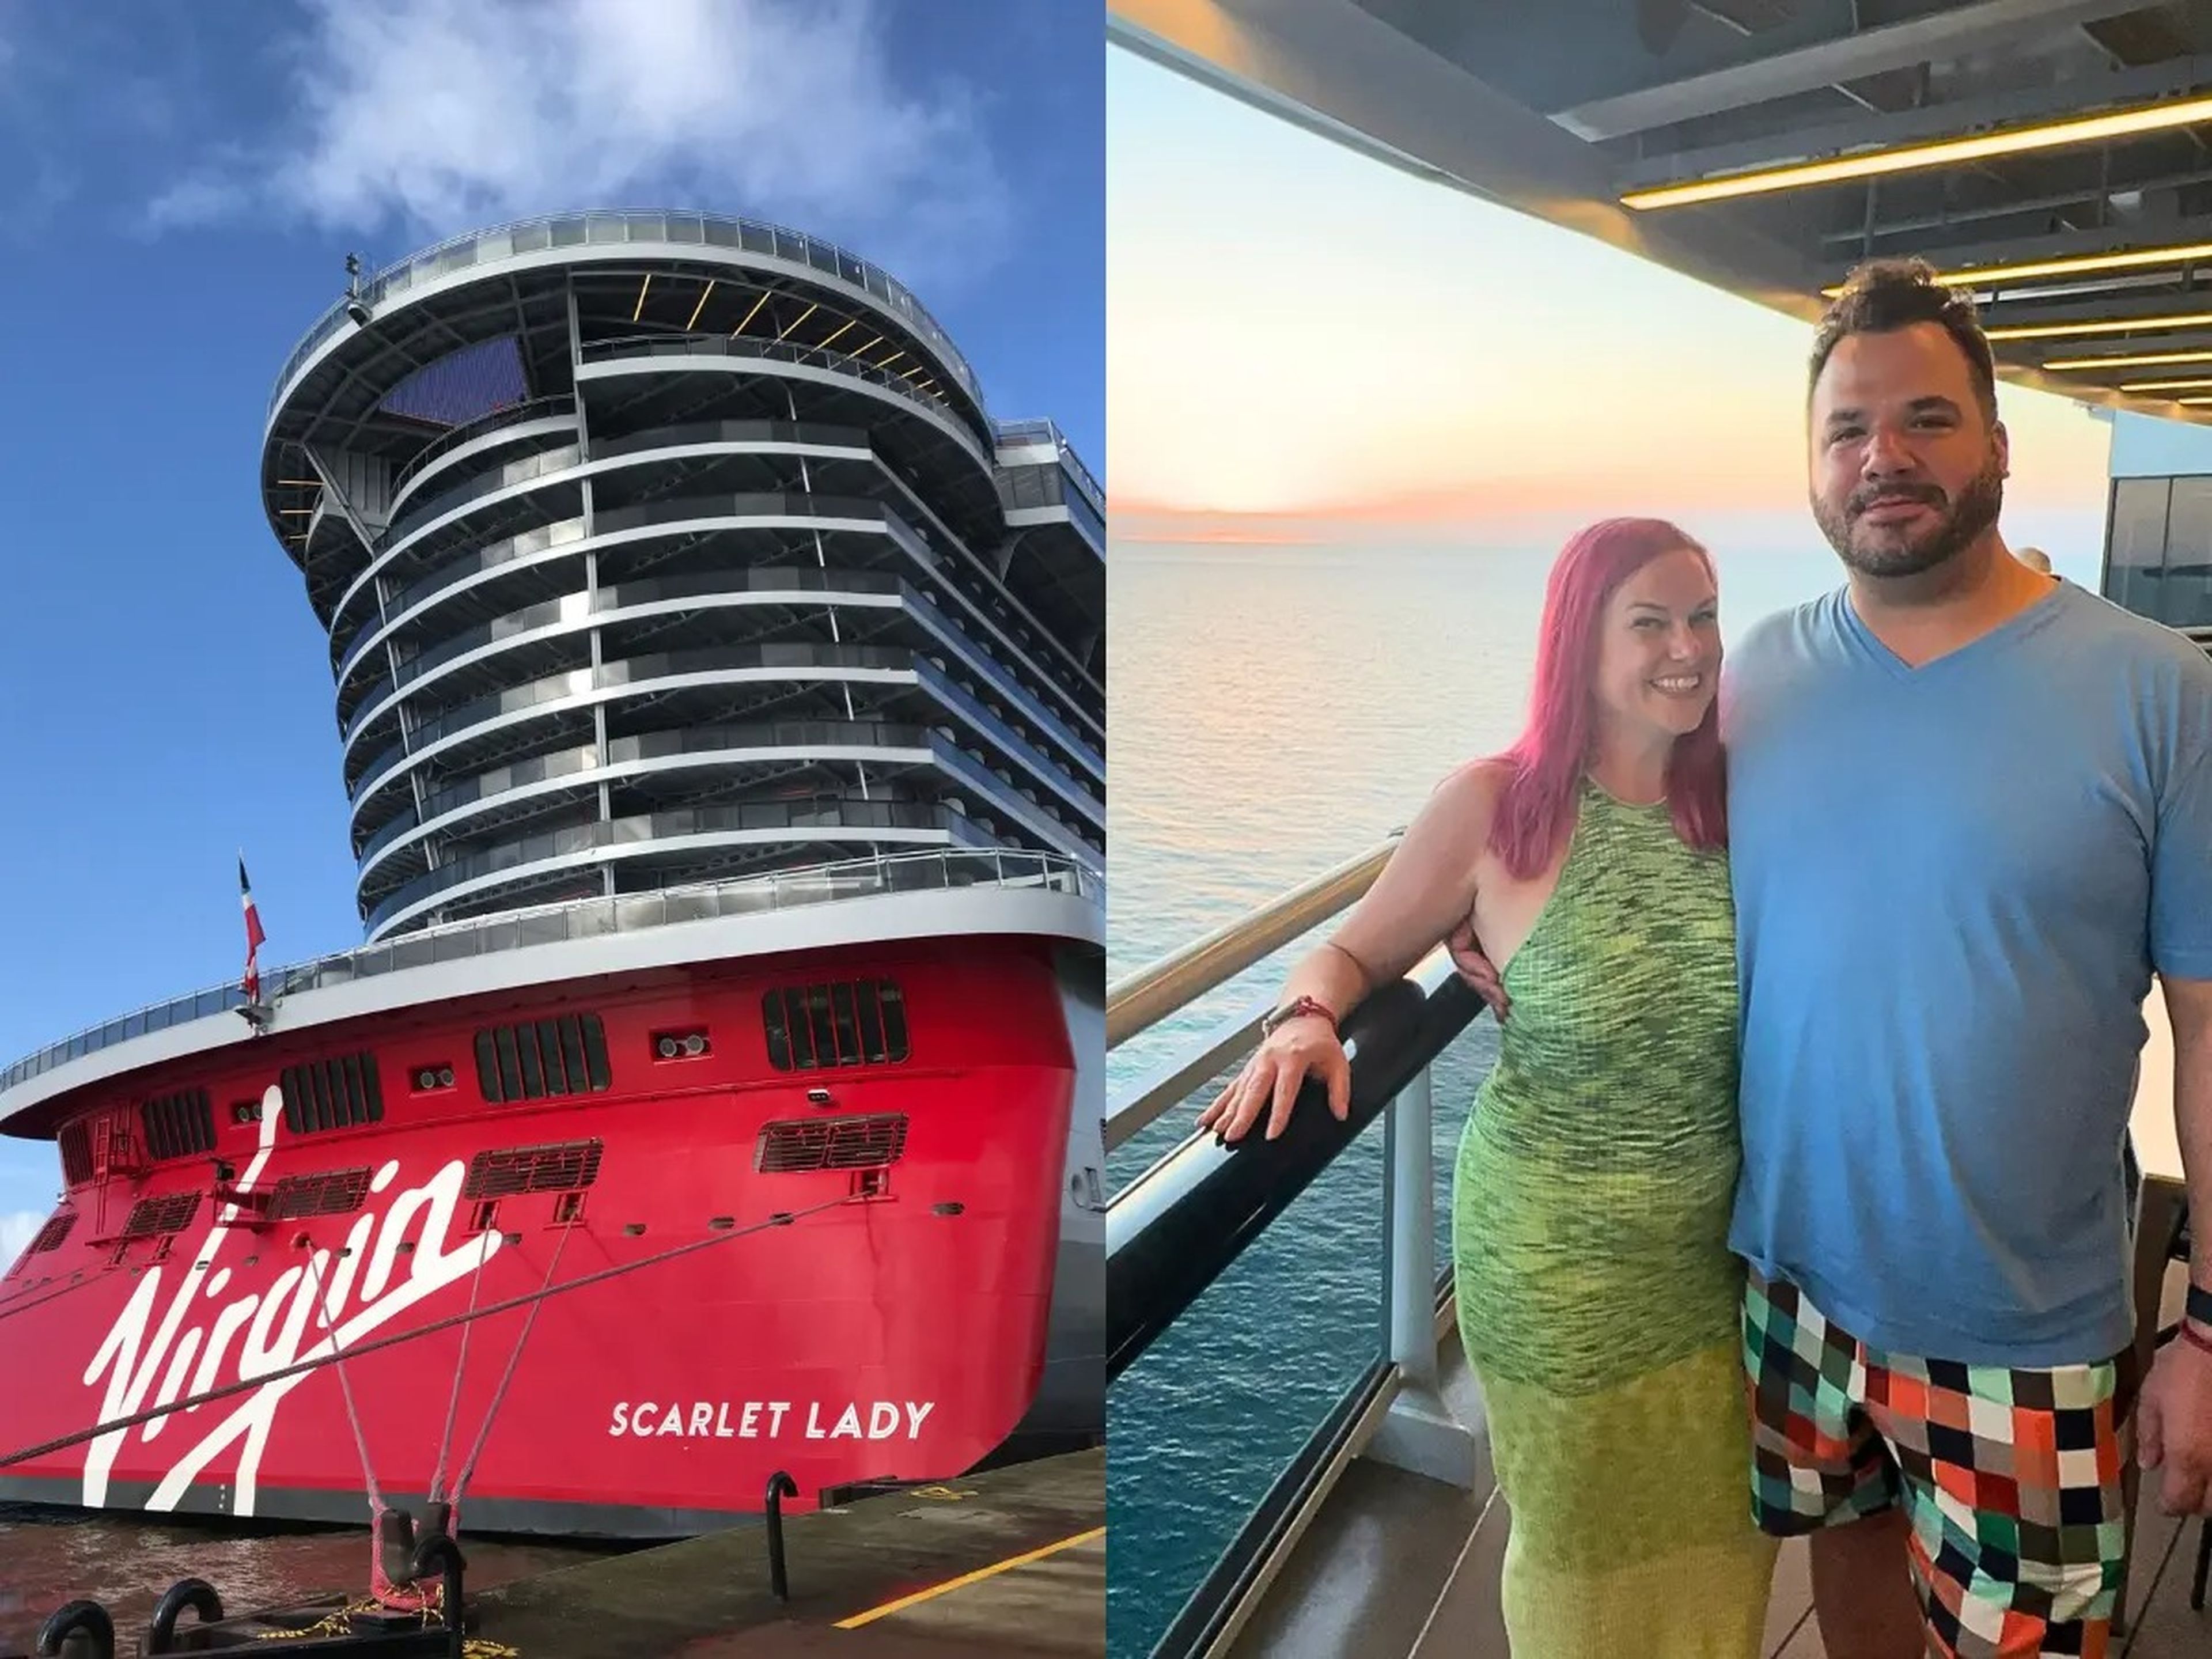 Left: Virgin Voyages Scarlet Lady, right: Eliza Green and her husband on the Dominican Daze cruise.